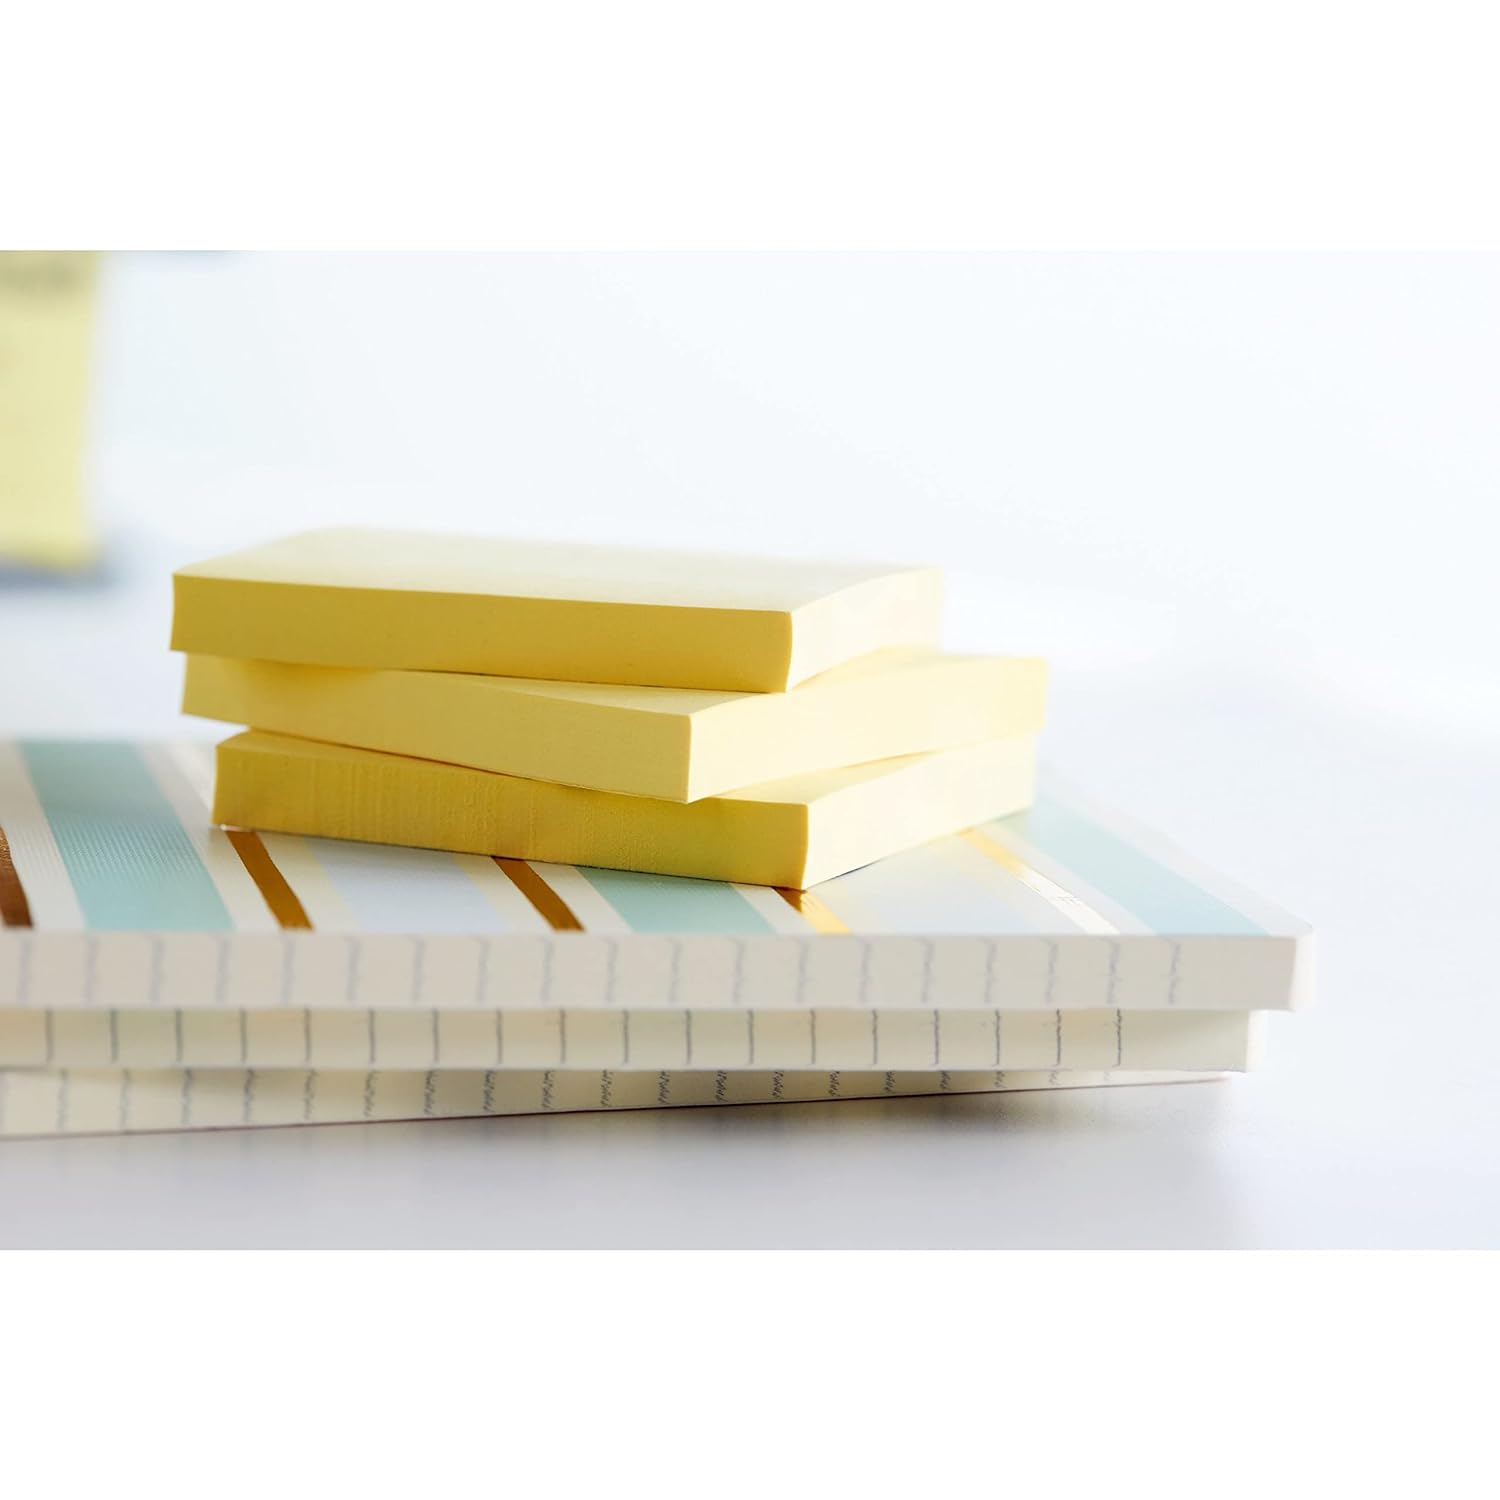 3M, Sticky Notes - POST IT | 100 Sheets.